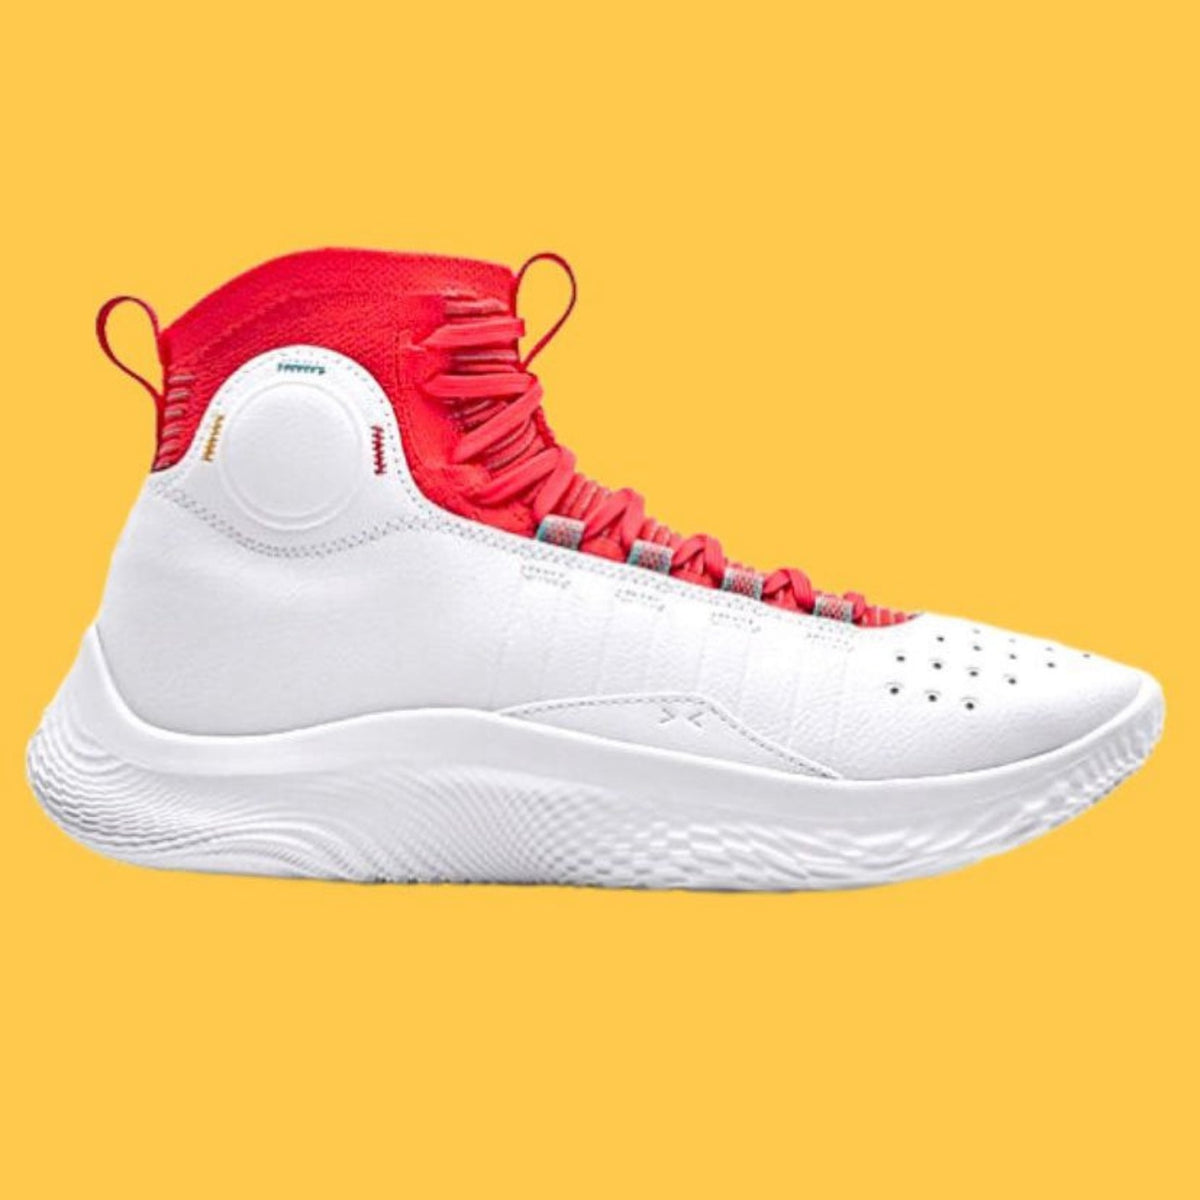 Curry 4 FloTro Pink and Black